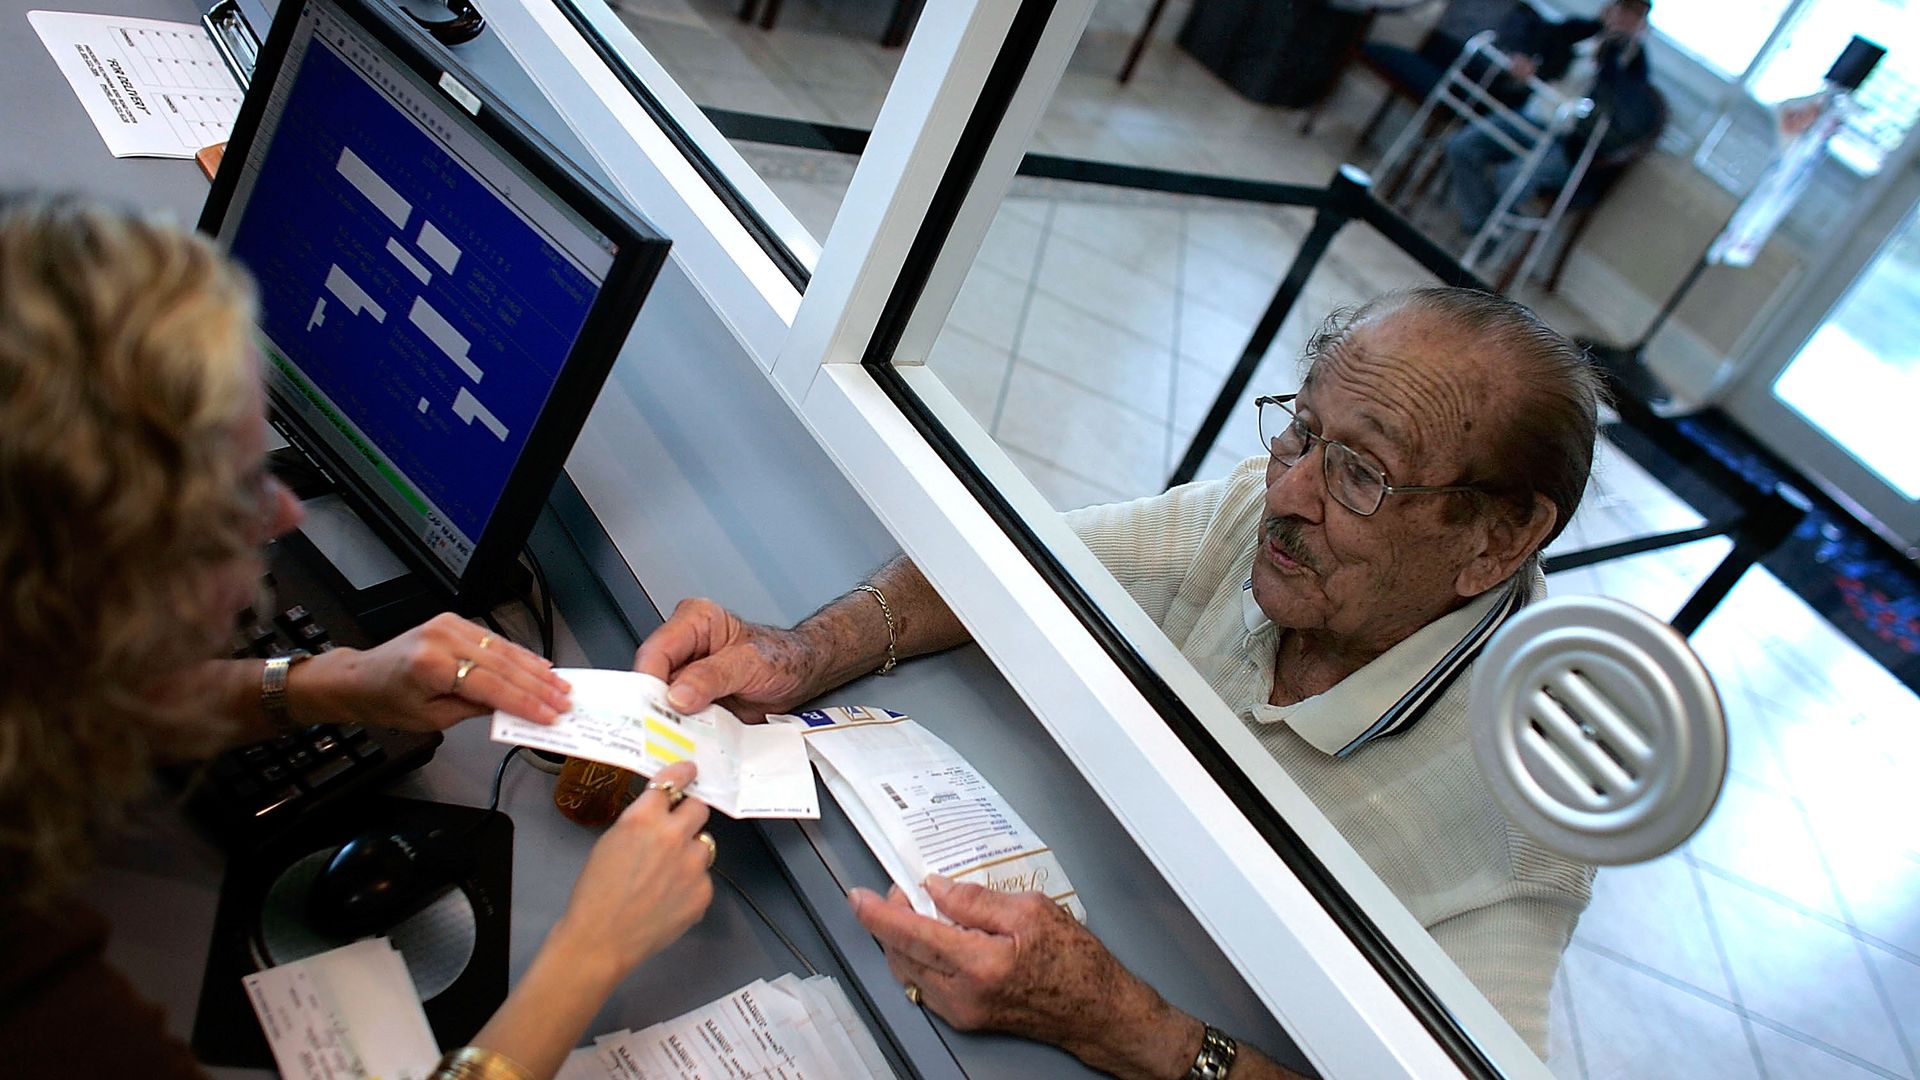 An older man grabs his prescription drugs at a pharmacy counter.